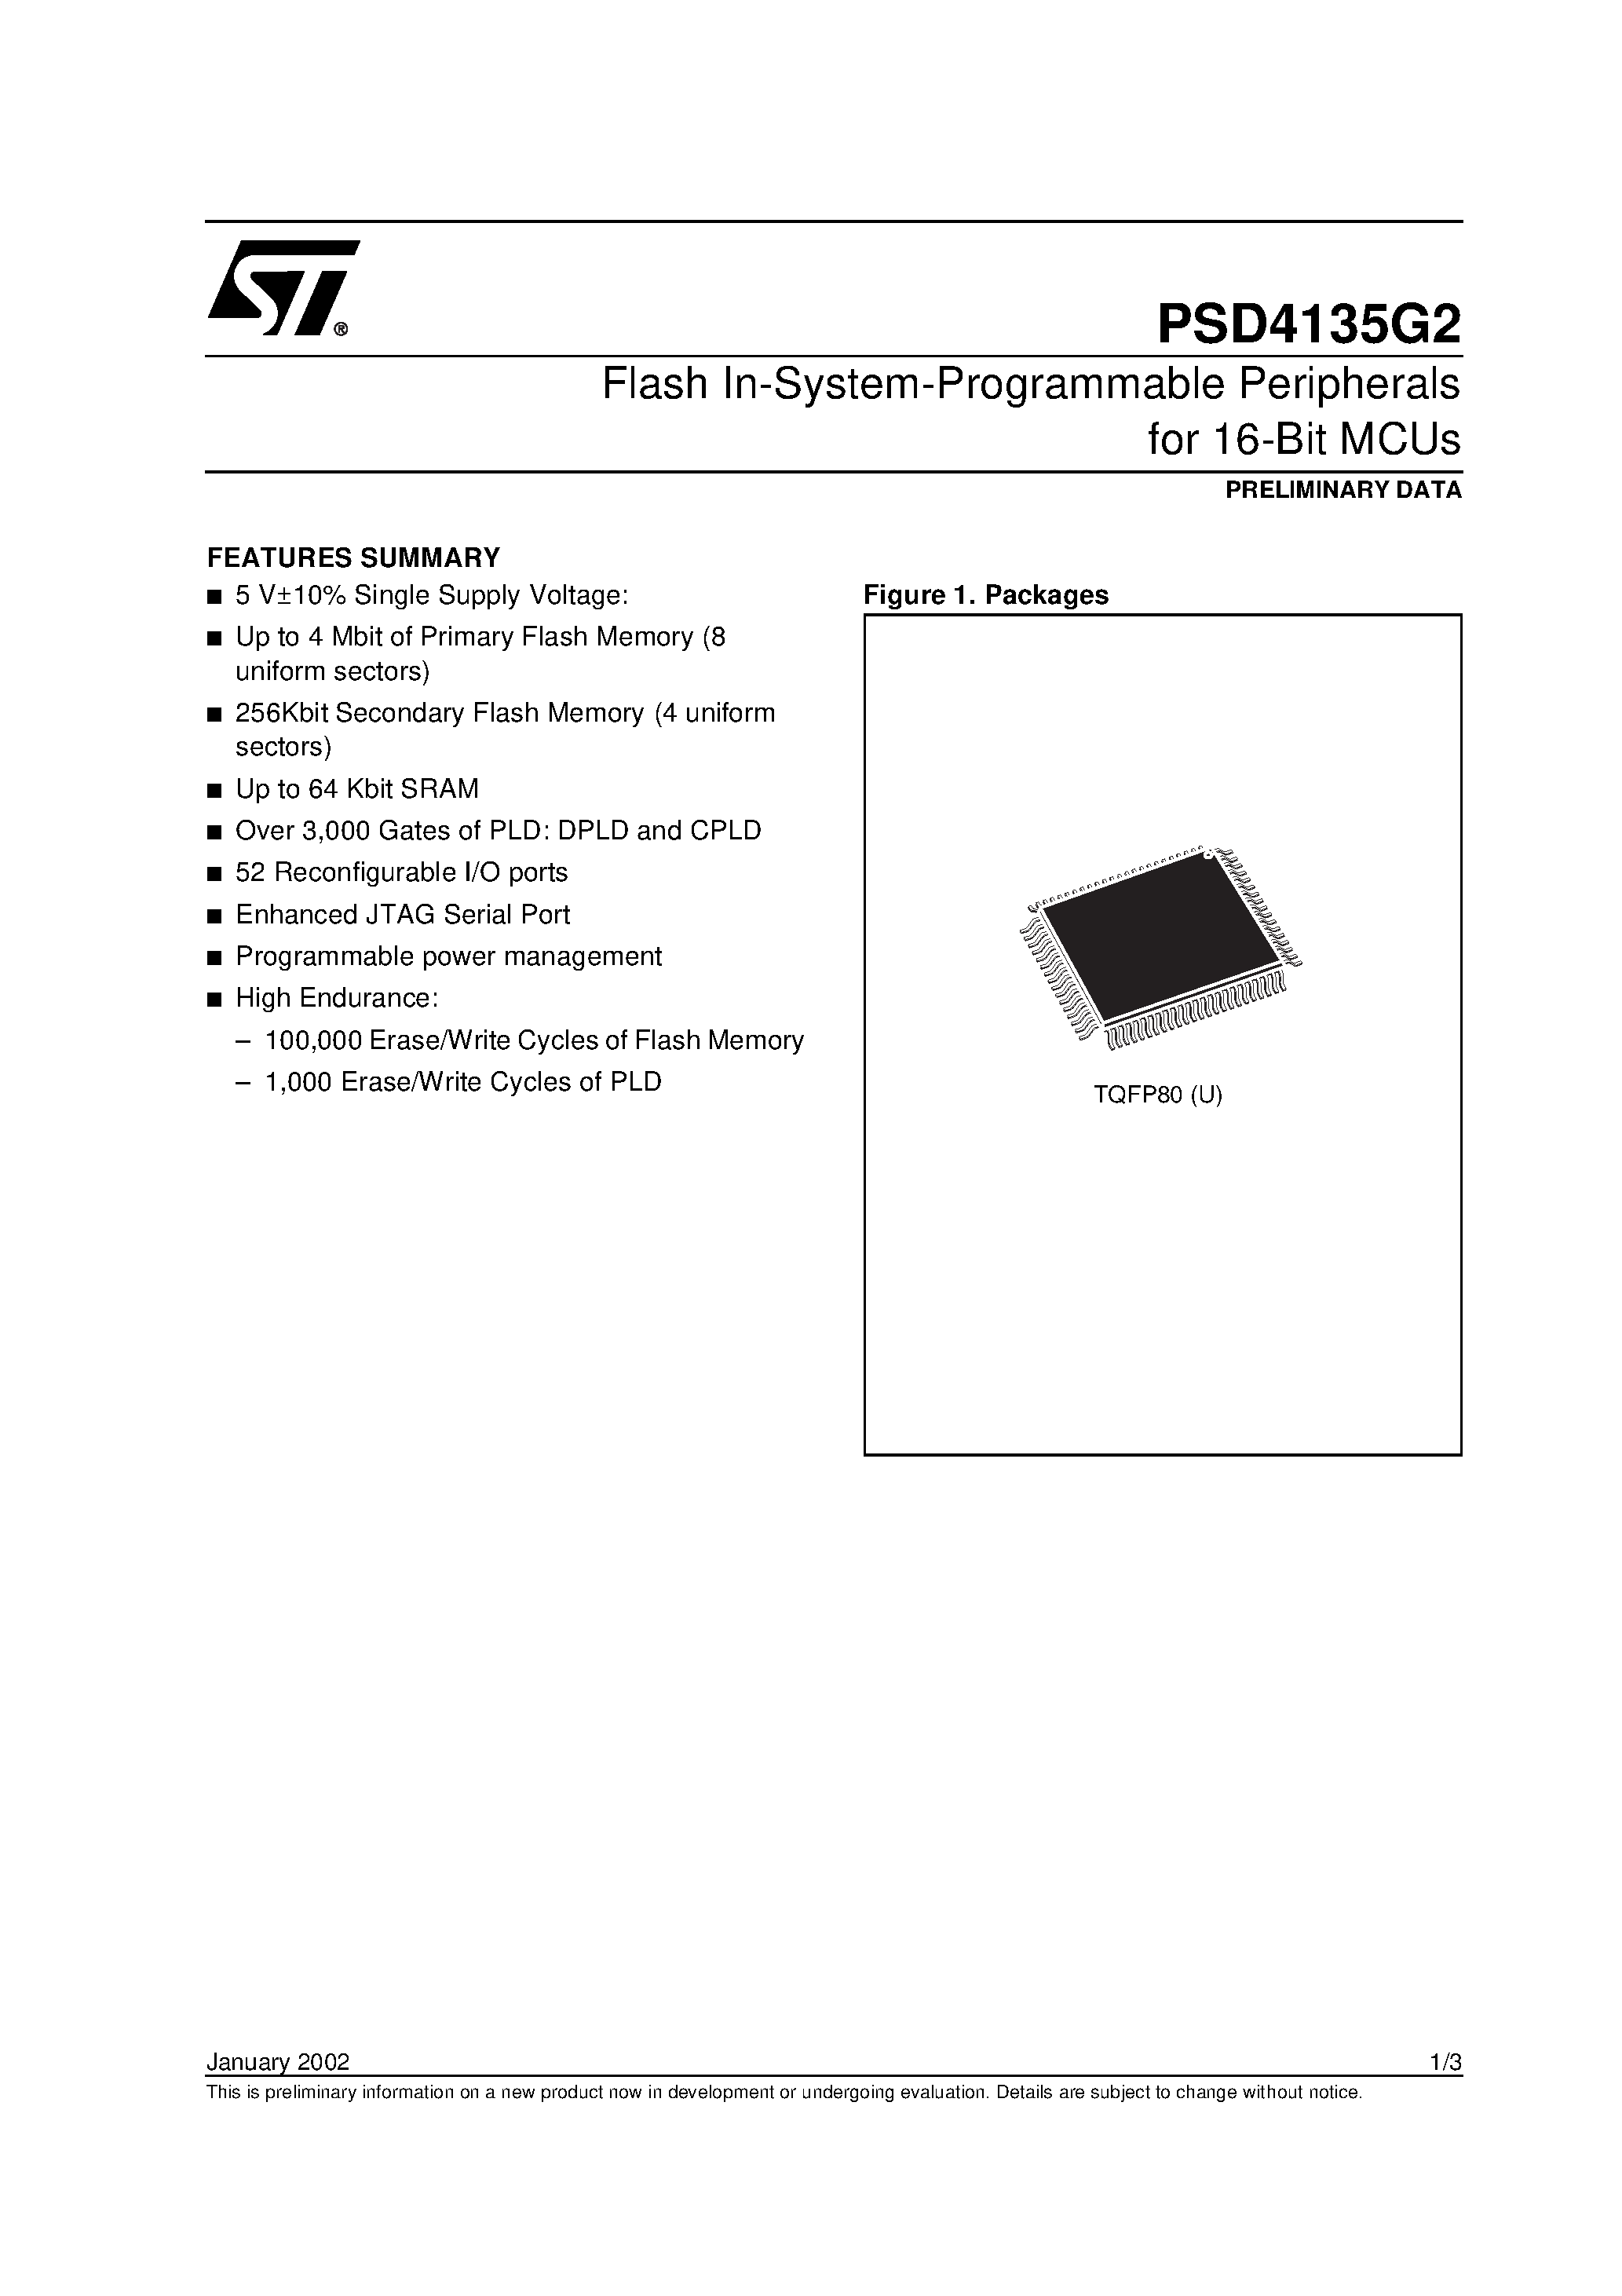 Даташит PSD4135F1-B-12U - Flash In-System-Programmable Peripherals for 16-Bit MCUs страница 1